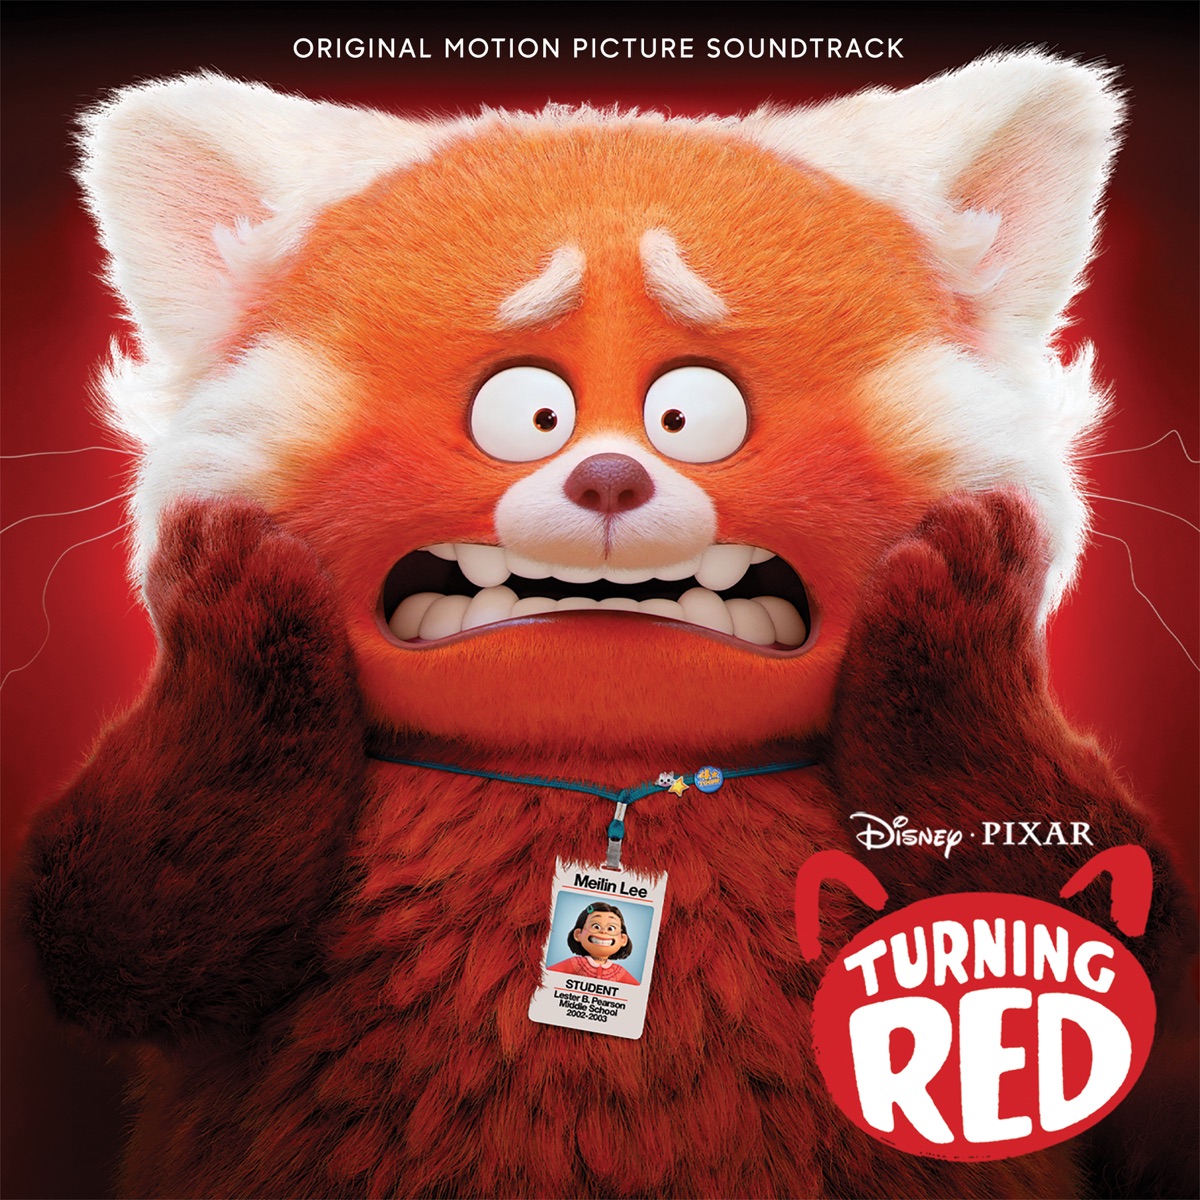 『4☆Town - U Know What's Up (The Panda Hustle Version) 歌詞』収録の『Turning Red (Original Motion Picture Soundtrack)』ジャケット